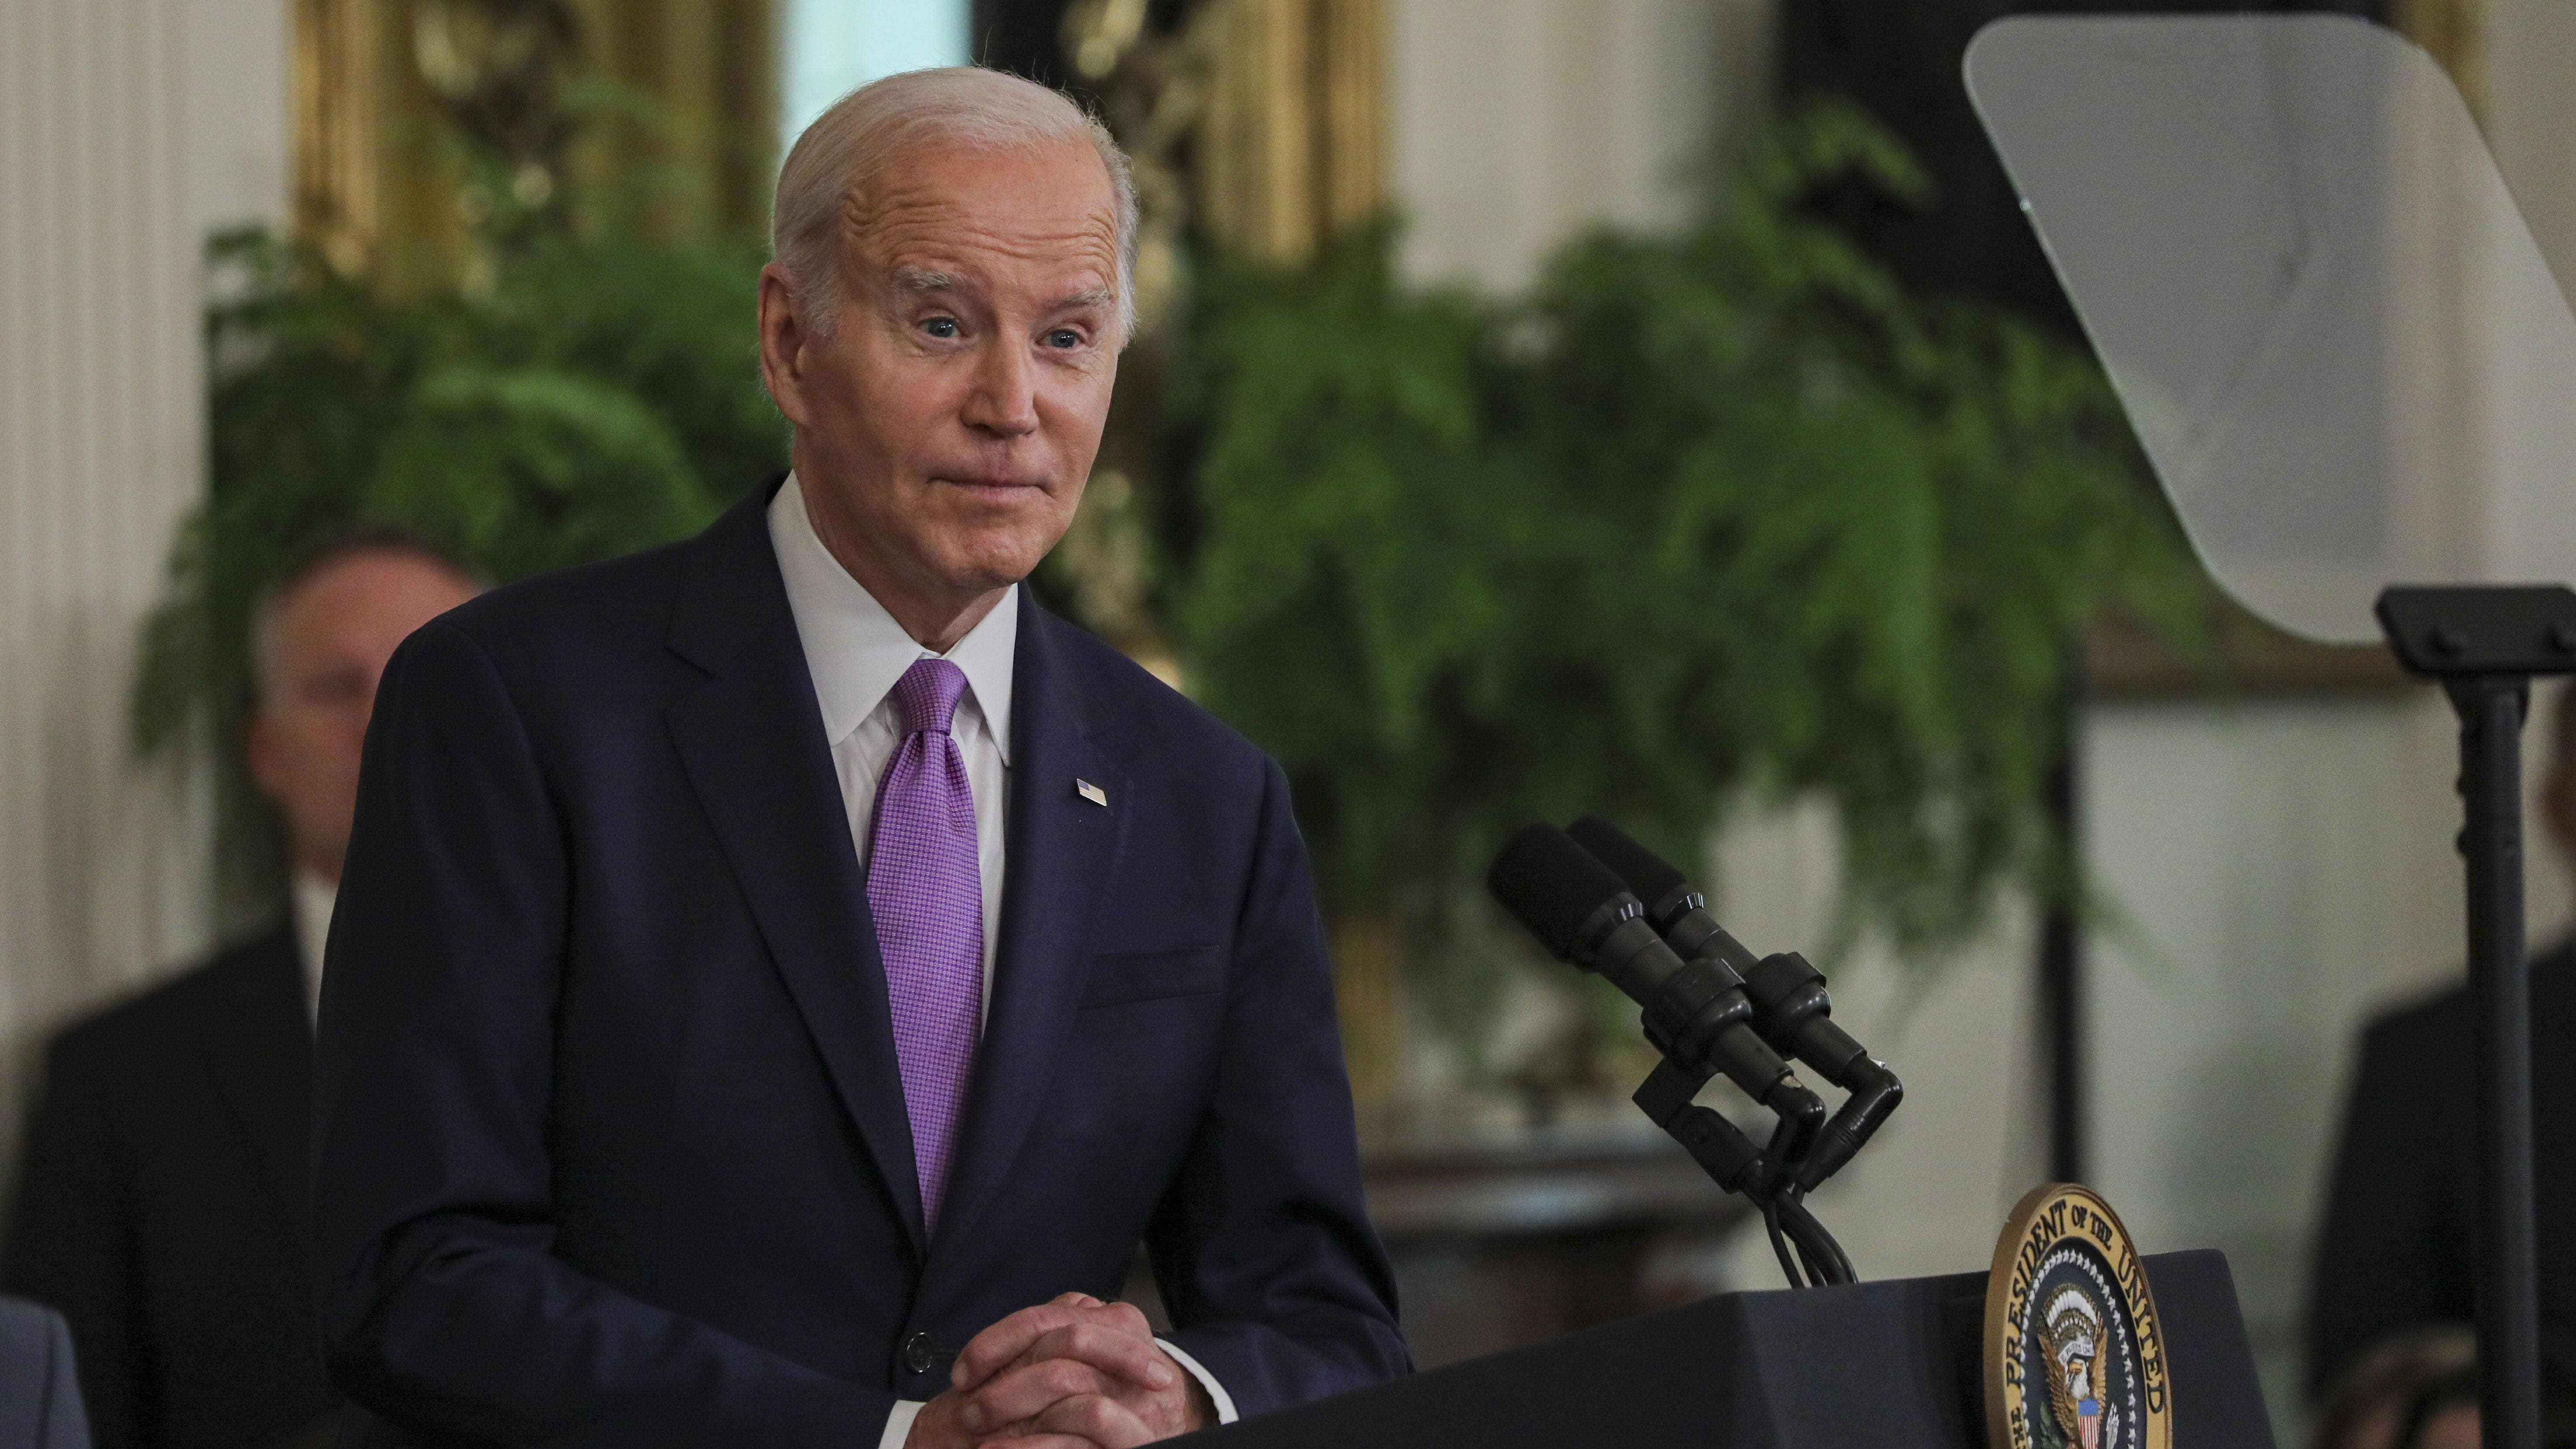 Biden falsely claims he has 'four granddaughters,' again omitting Hunter's child with ex-stripper